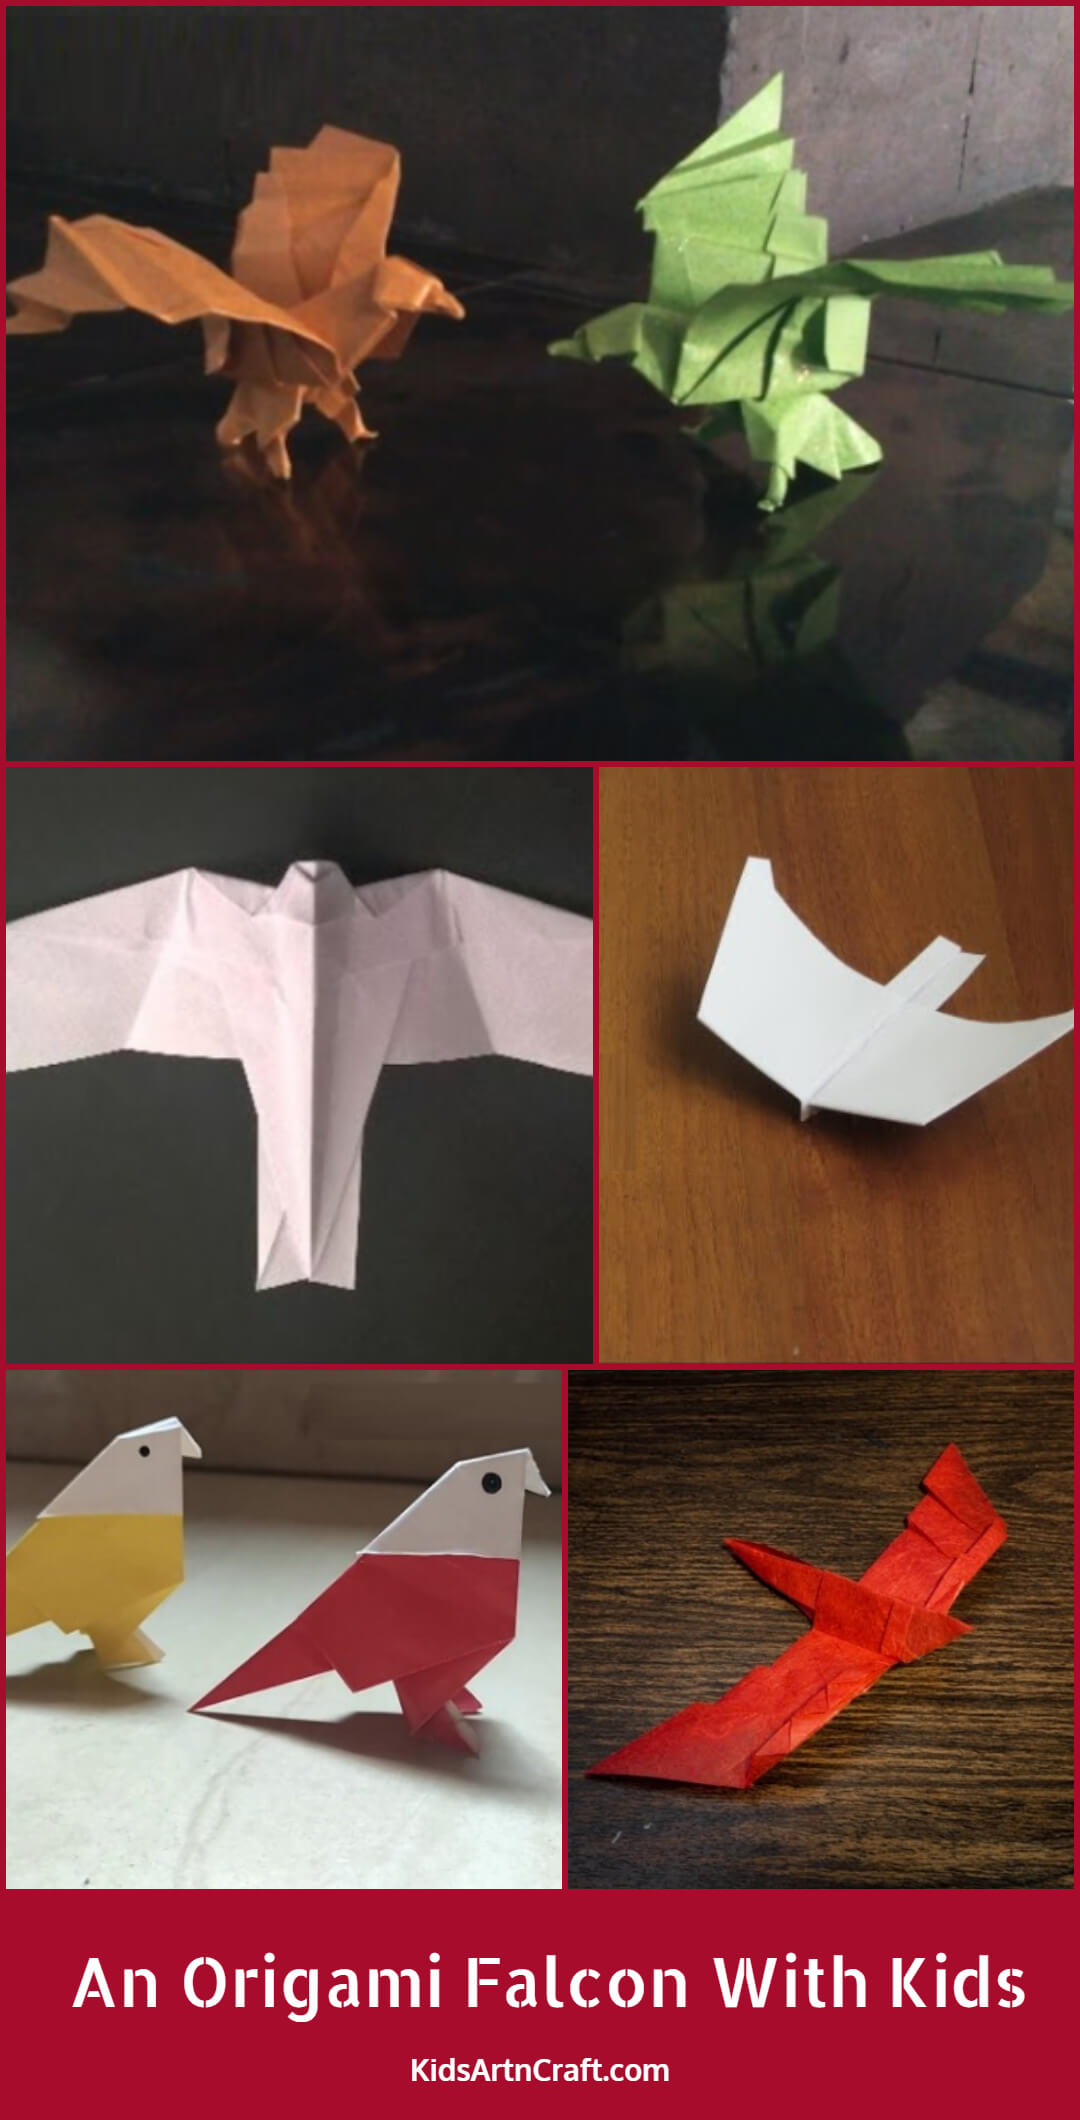 How To Make An Origami Falcon With Kids